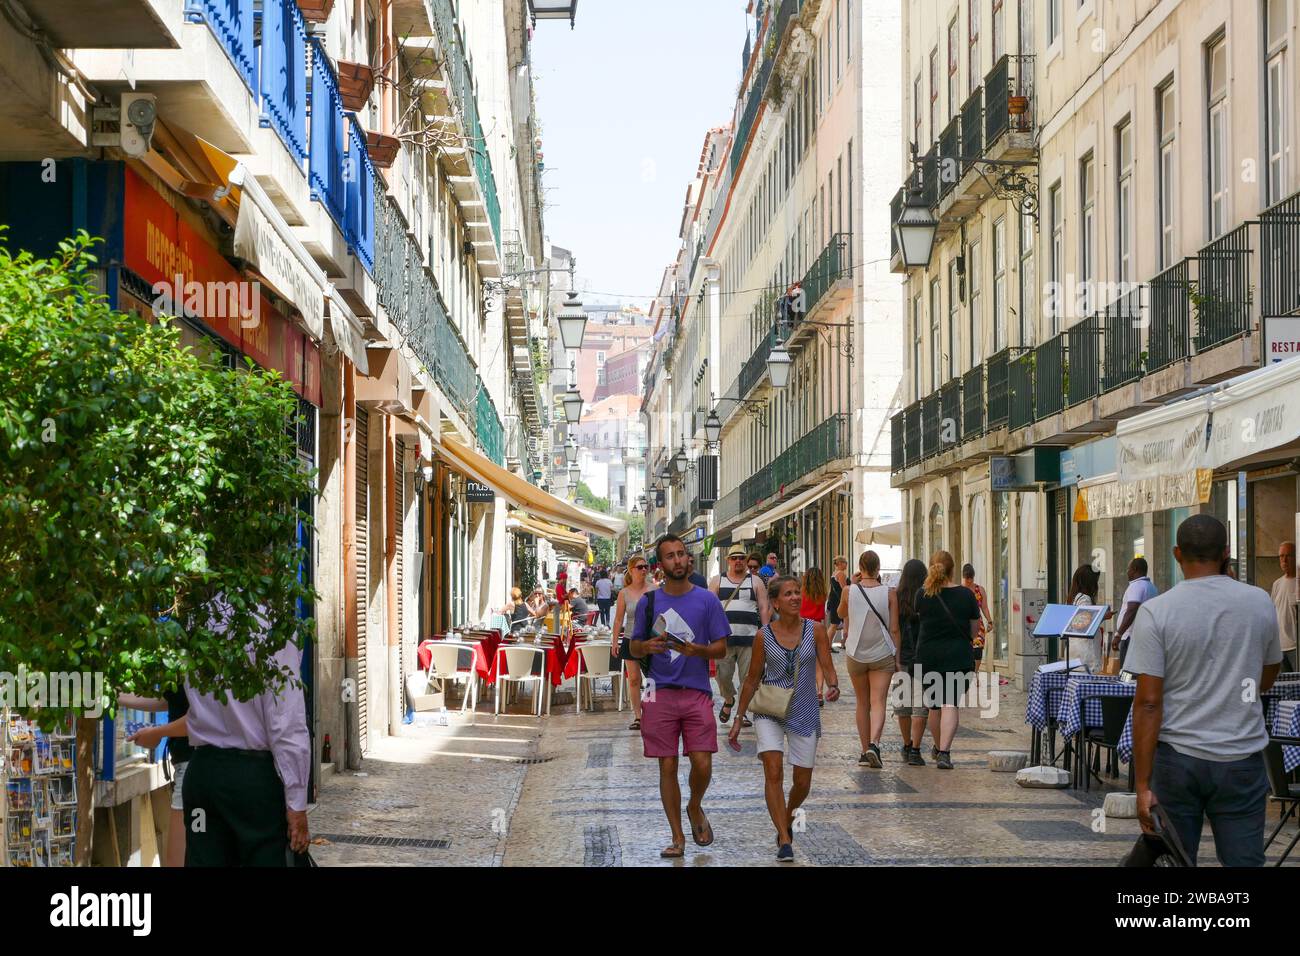 Lisbon, Portugal - June 19 2017: Rua Augusta street, popular downtown area with shops and restaurants Stock Photo